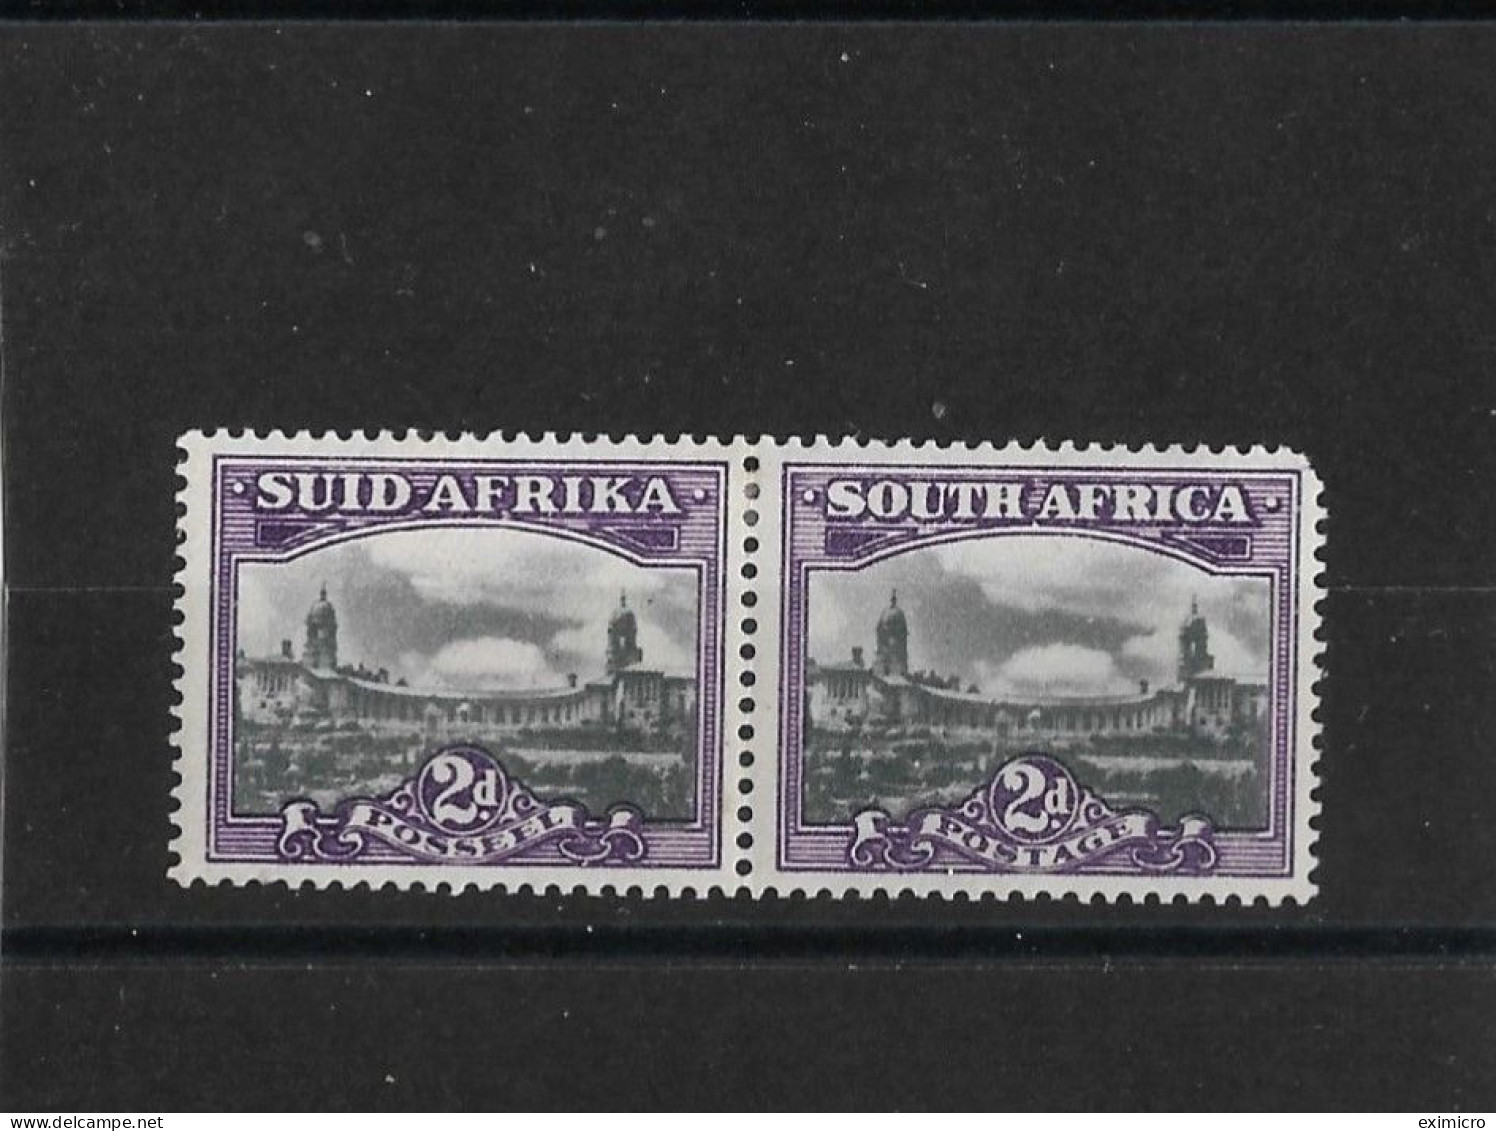 SOUTH AFRICA 1945 2d SLATE AND DEEP REDDISH VIOLET SG 107 MOUNTED MINT Cat £22 - Unused Stamps